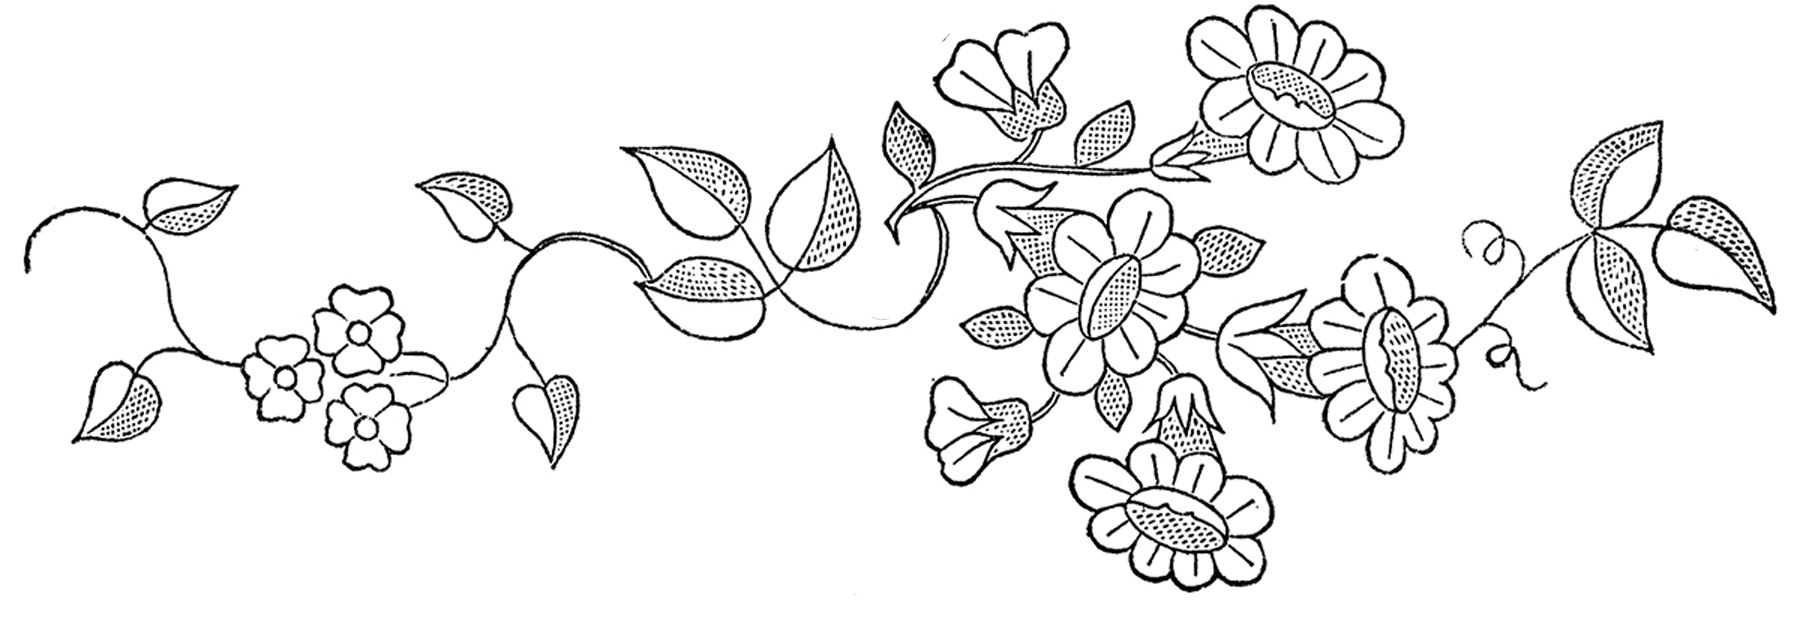 Brush Embroidery Patterns Floral Embroidery Patterns Pretty The Graphics Fairy